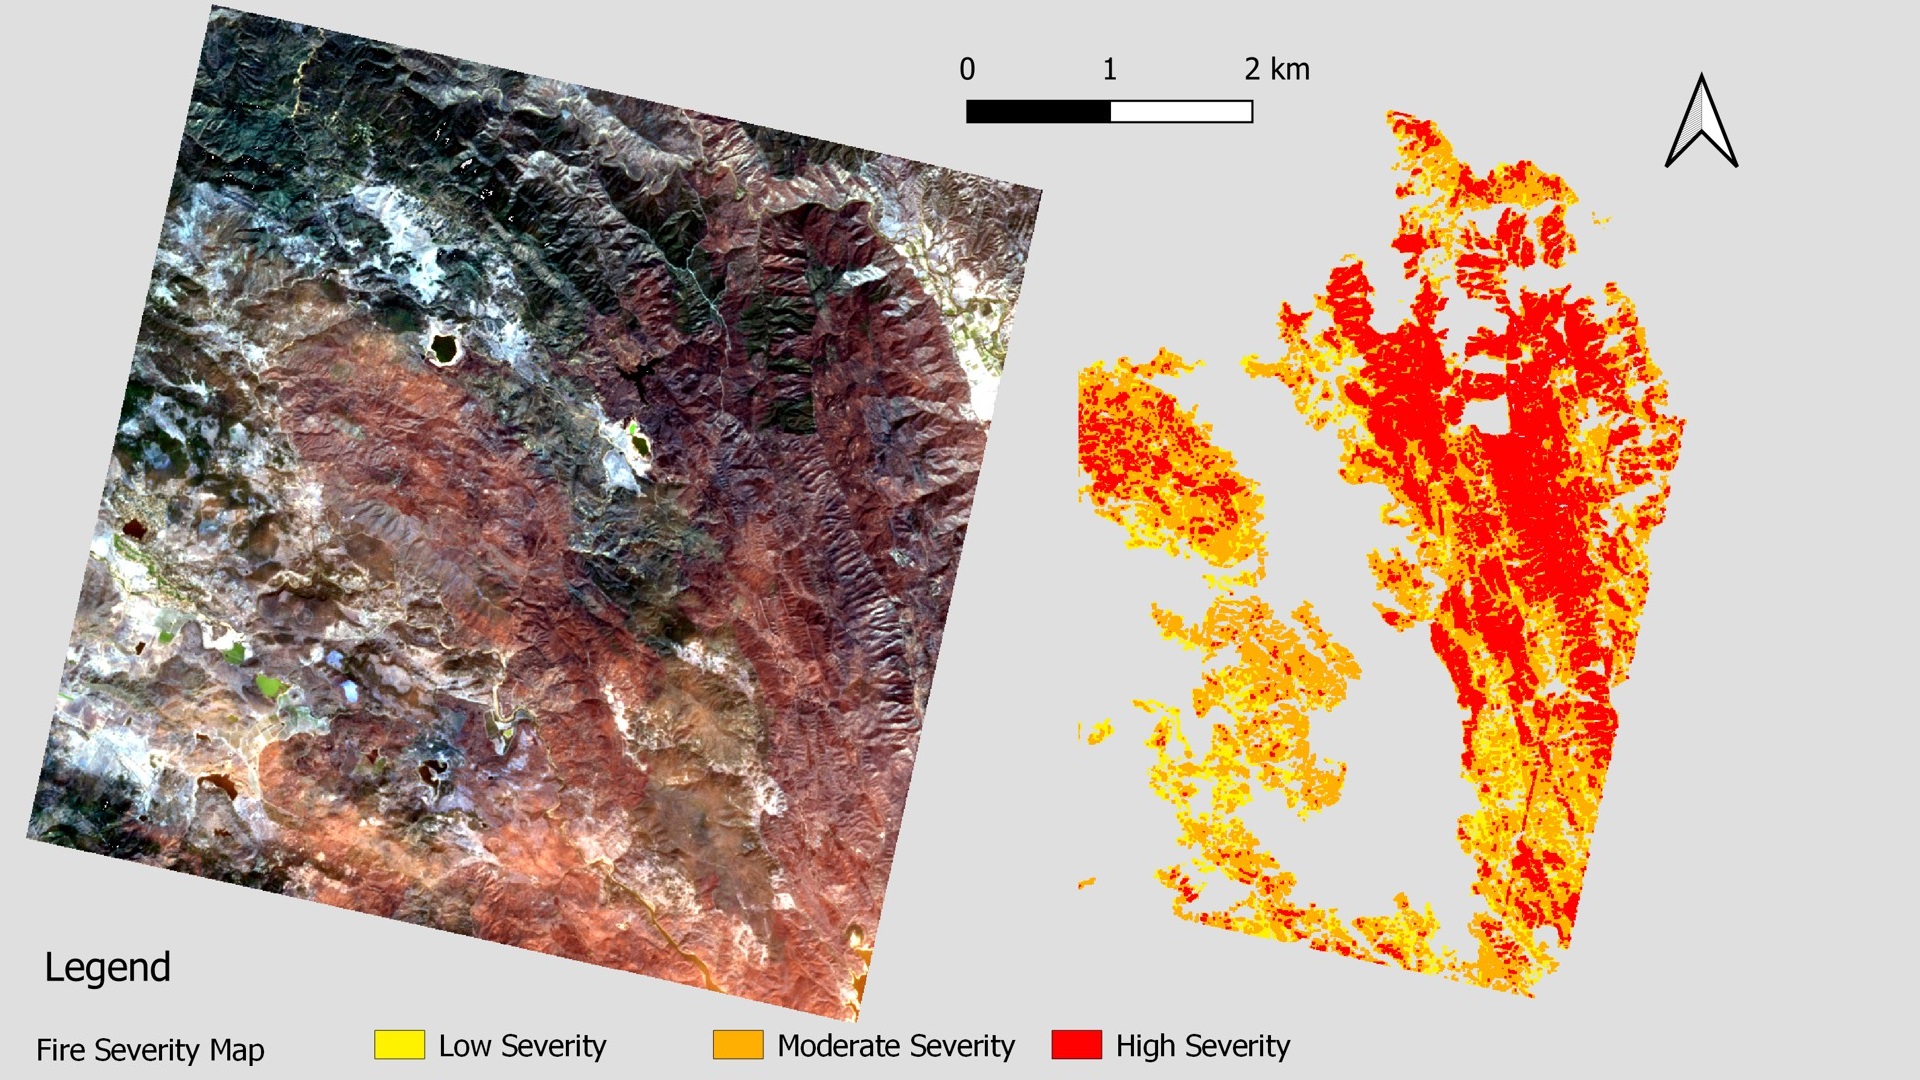 ASI - PRISMA for extraction of Fire Severity Maps